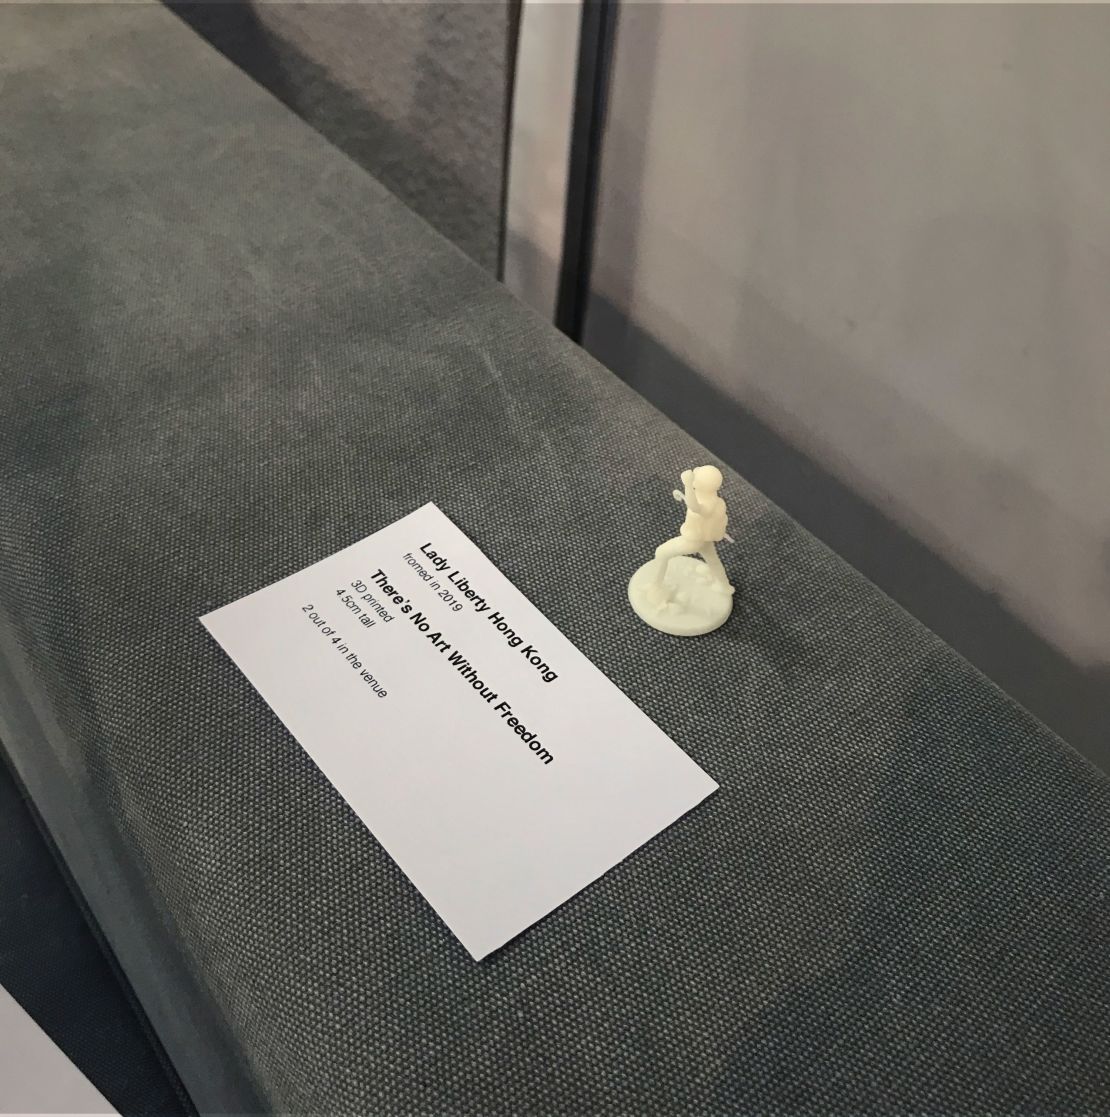 An activist group installed miniatures of the Lady Liberty statue at four spots around the Art Basel Hong Kong fair.